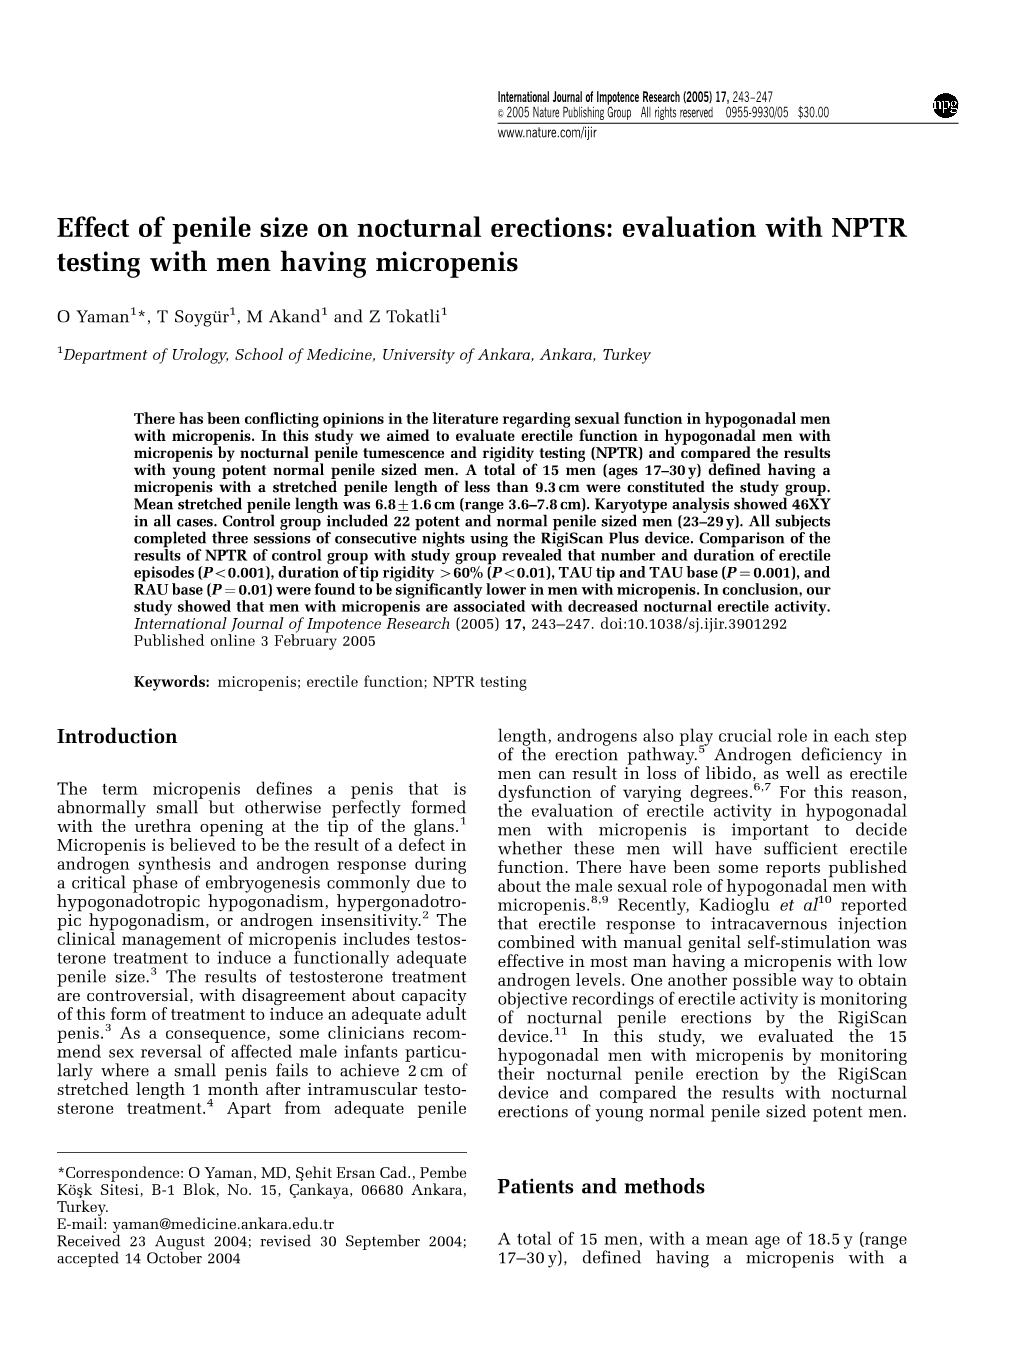 Effect of Penile Size on Nocturnal Erections: Evaluation with NPTR Testing with Men Having Micropenis